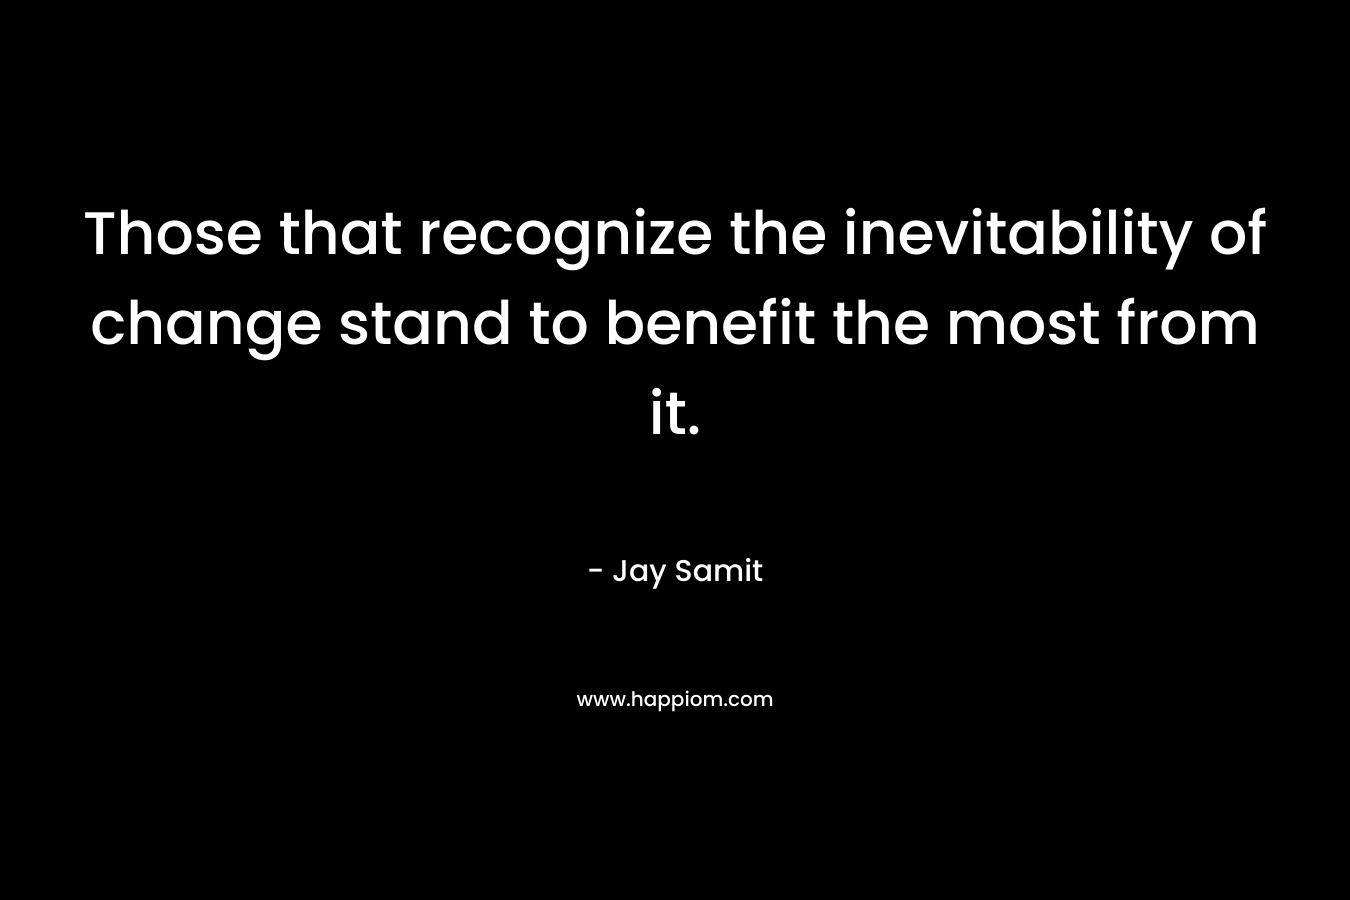 Those that recognize the inevitability of change stand to benefit the most from it.